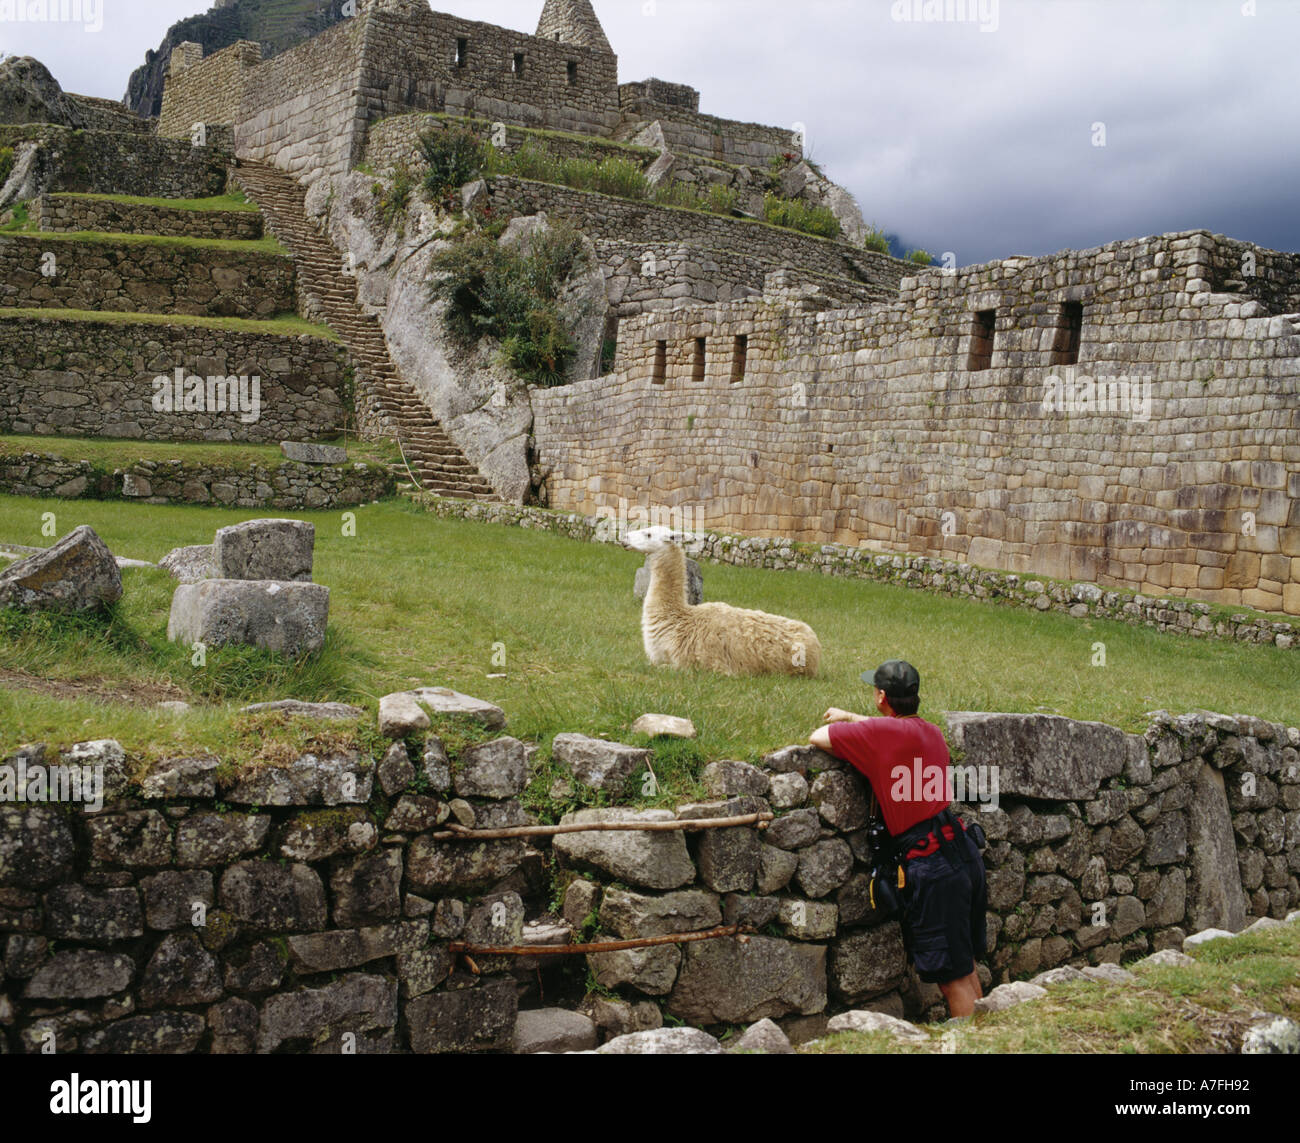 Tourist watching Alpaca in Machu Picchu, high in the Andes Mountains of Peru Stock Photo